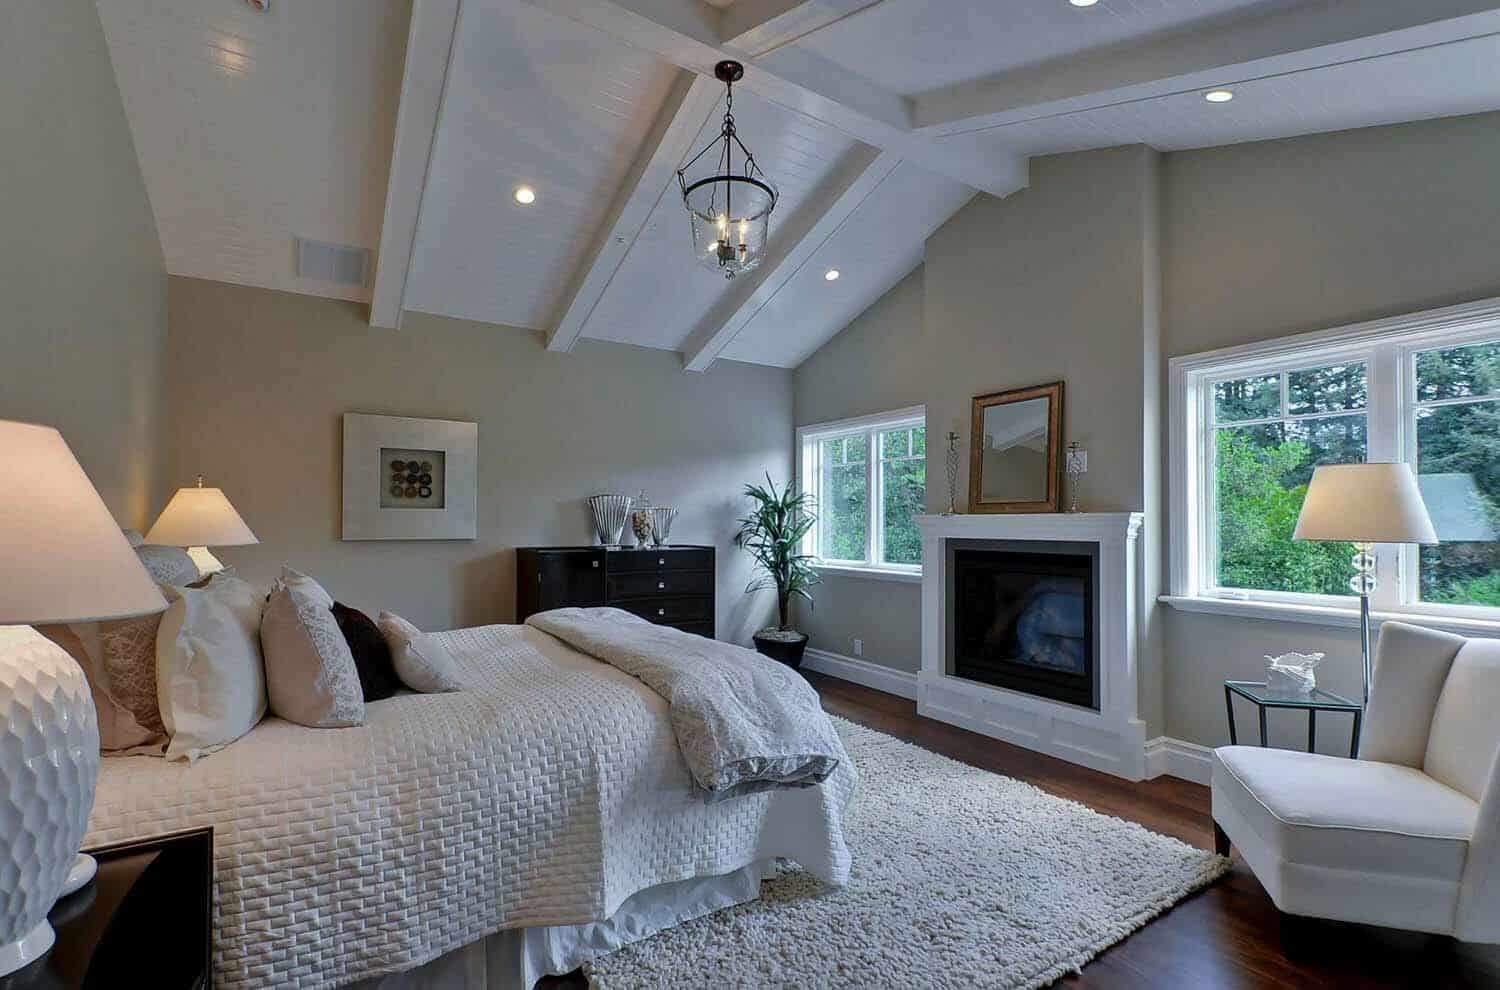 25 Absolutely stunning master bedroom color scheme ideas